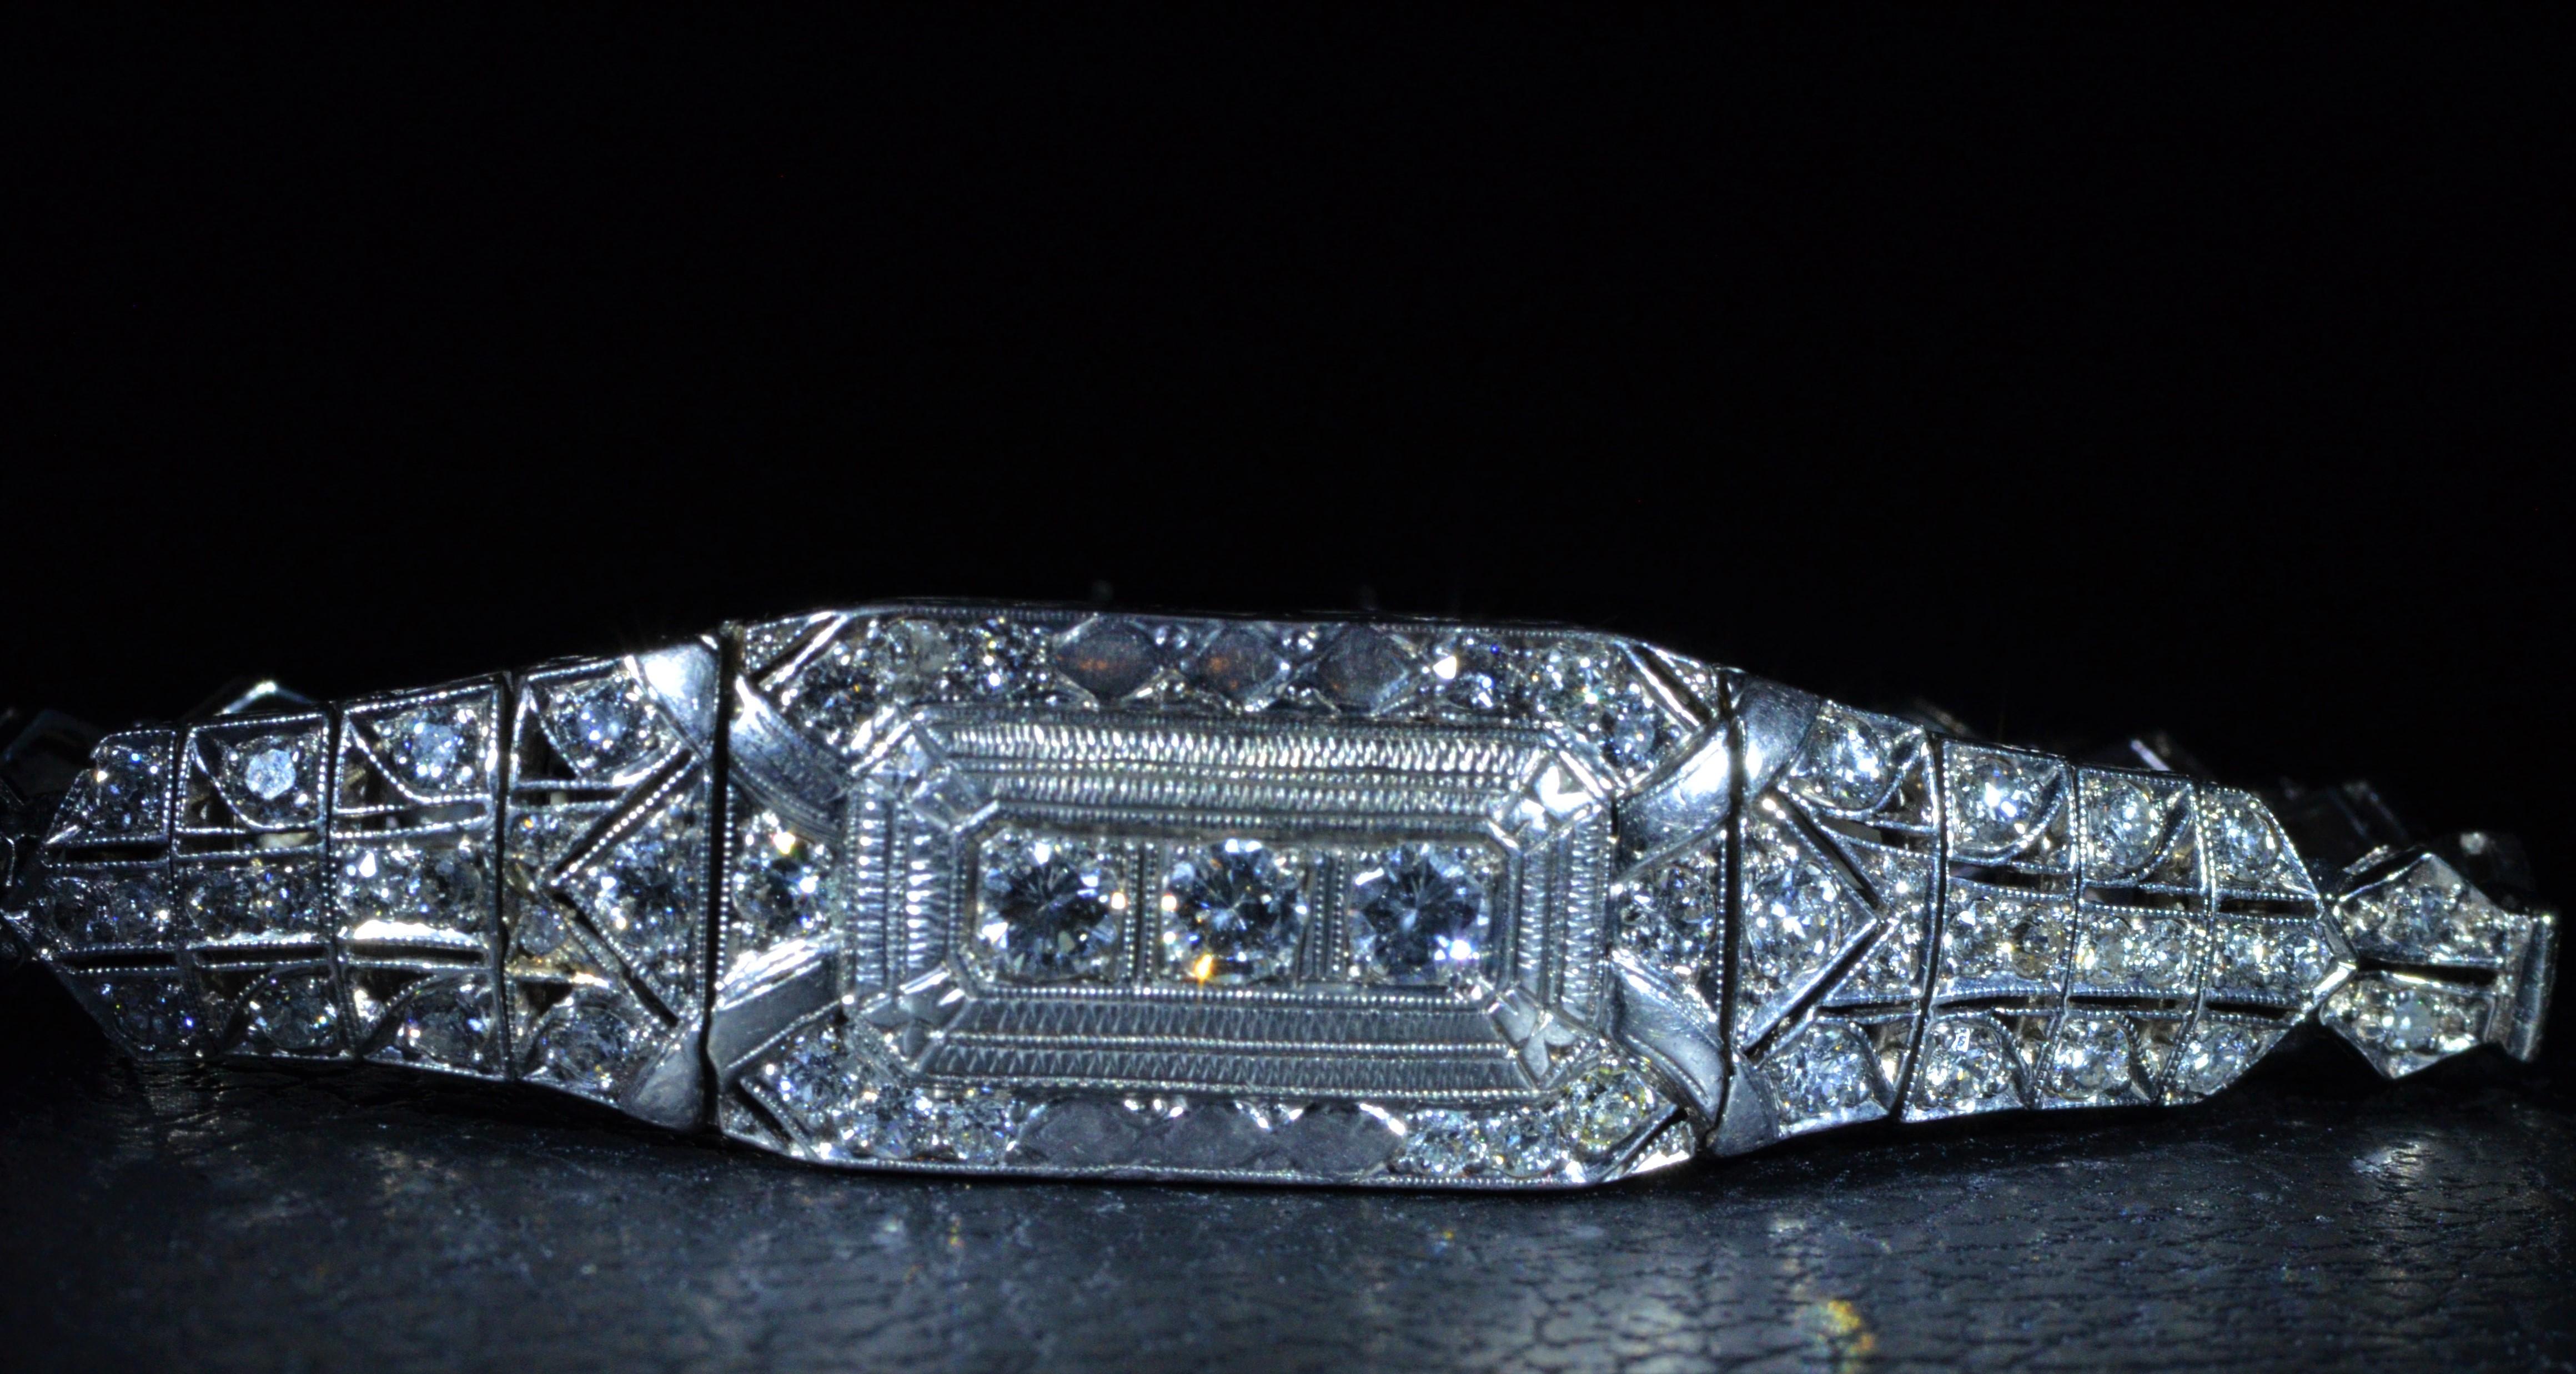 Hand Engraved Filigree Bracelet set with 2 Carats Total Weight in Diamonds.  The diamonds have an approximate Gemological Institute of America clarity grade of Vs1 to Vs2 and a color grade of F to G and are a combination of transitional and old